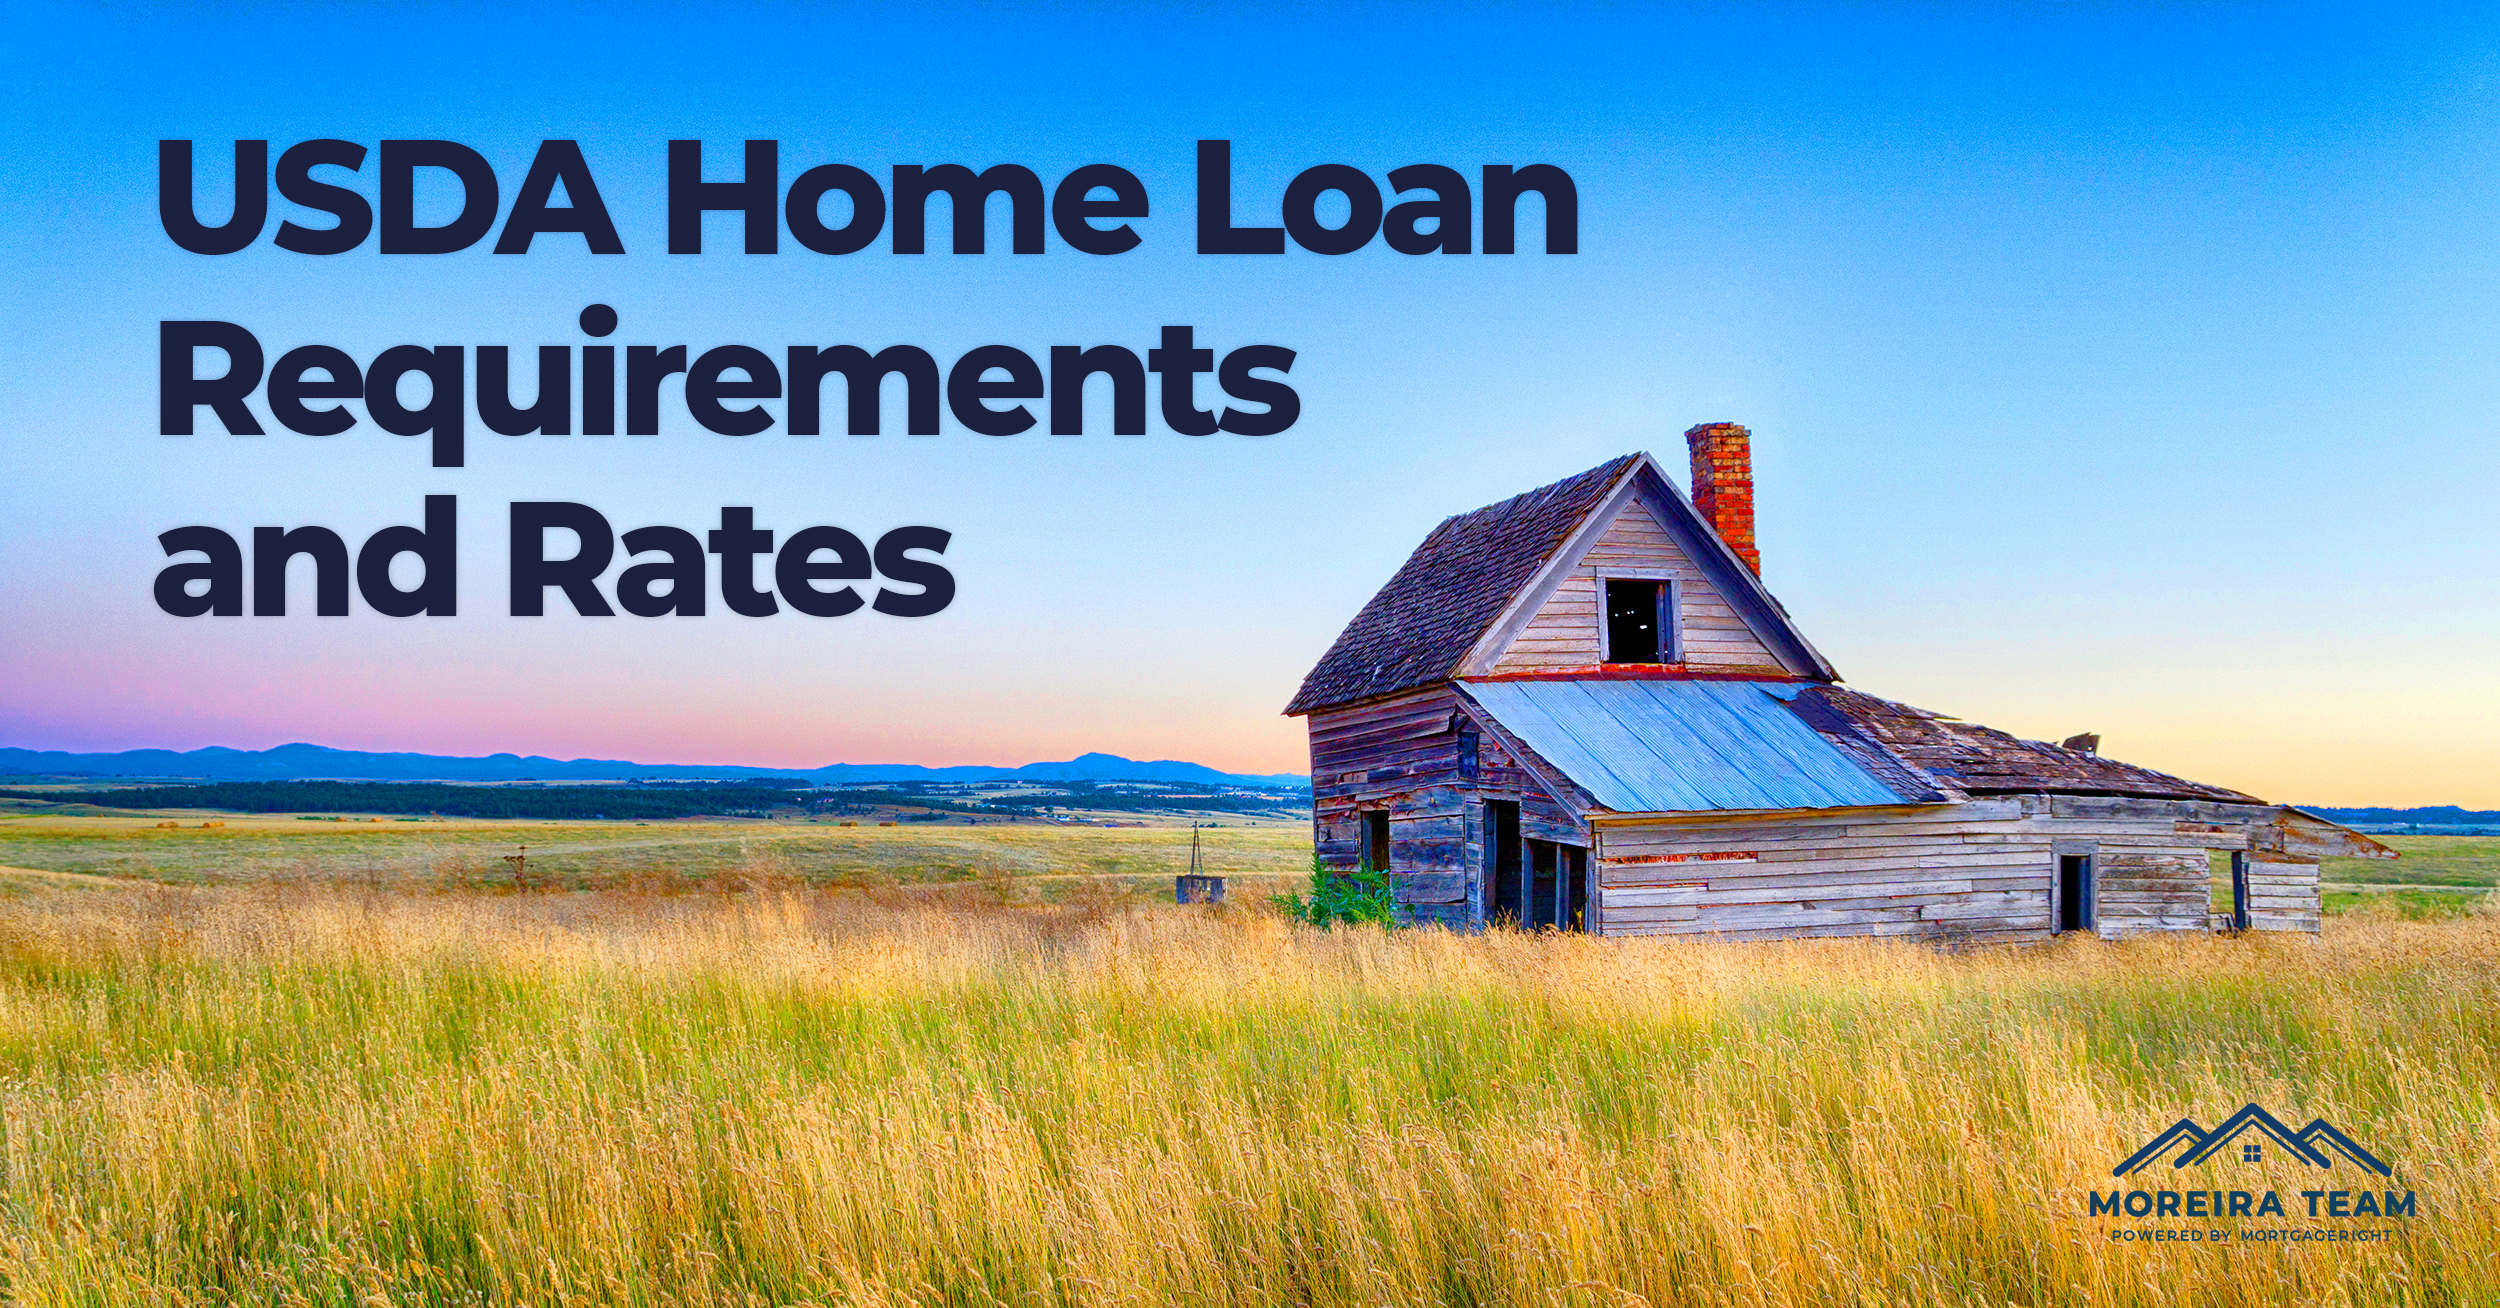 2021 USDA Home Loan Requirements and Rates